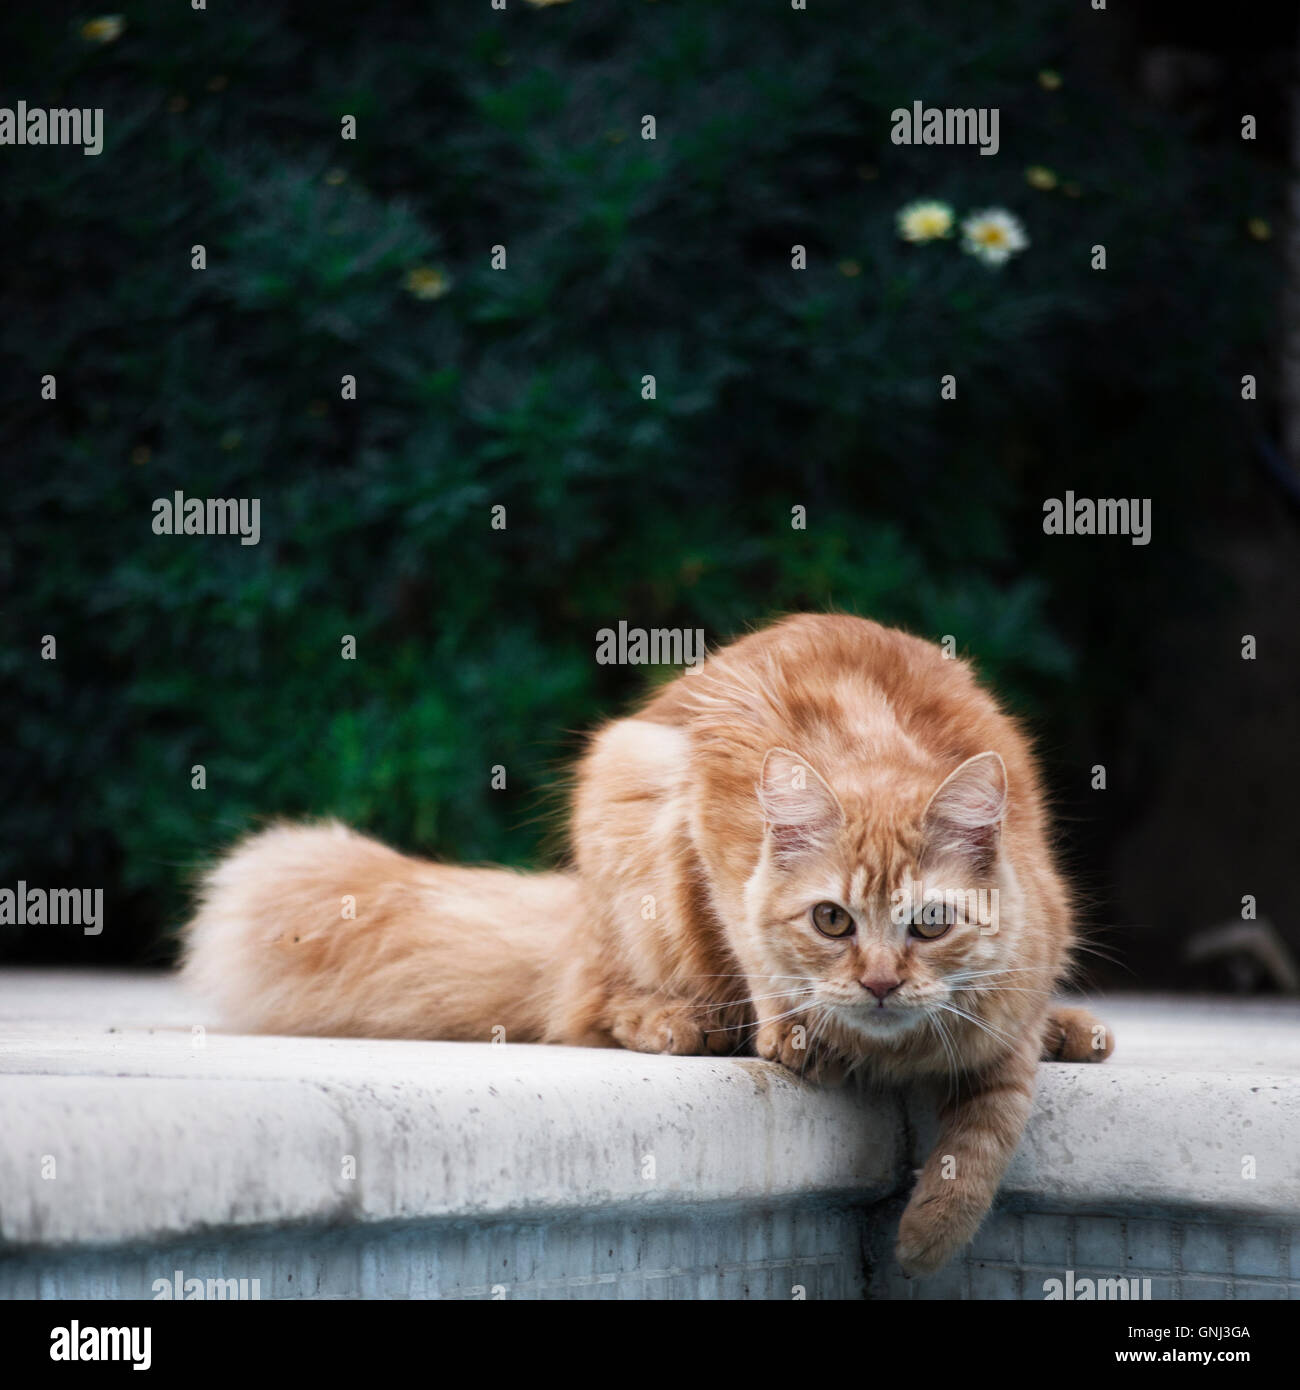 Cat with paw in a swimming pool Stock Photo